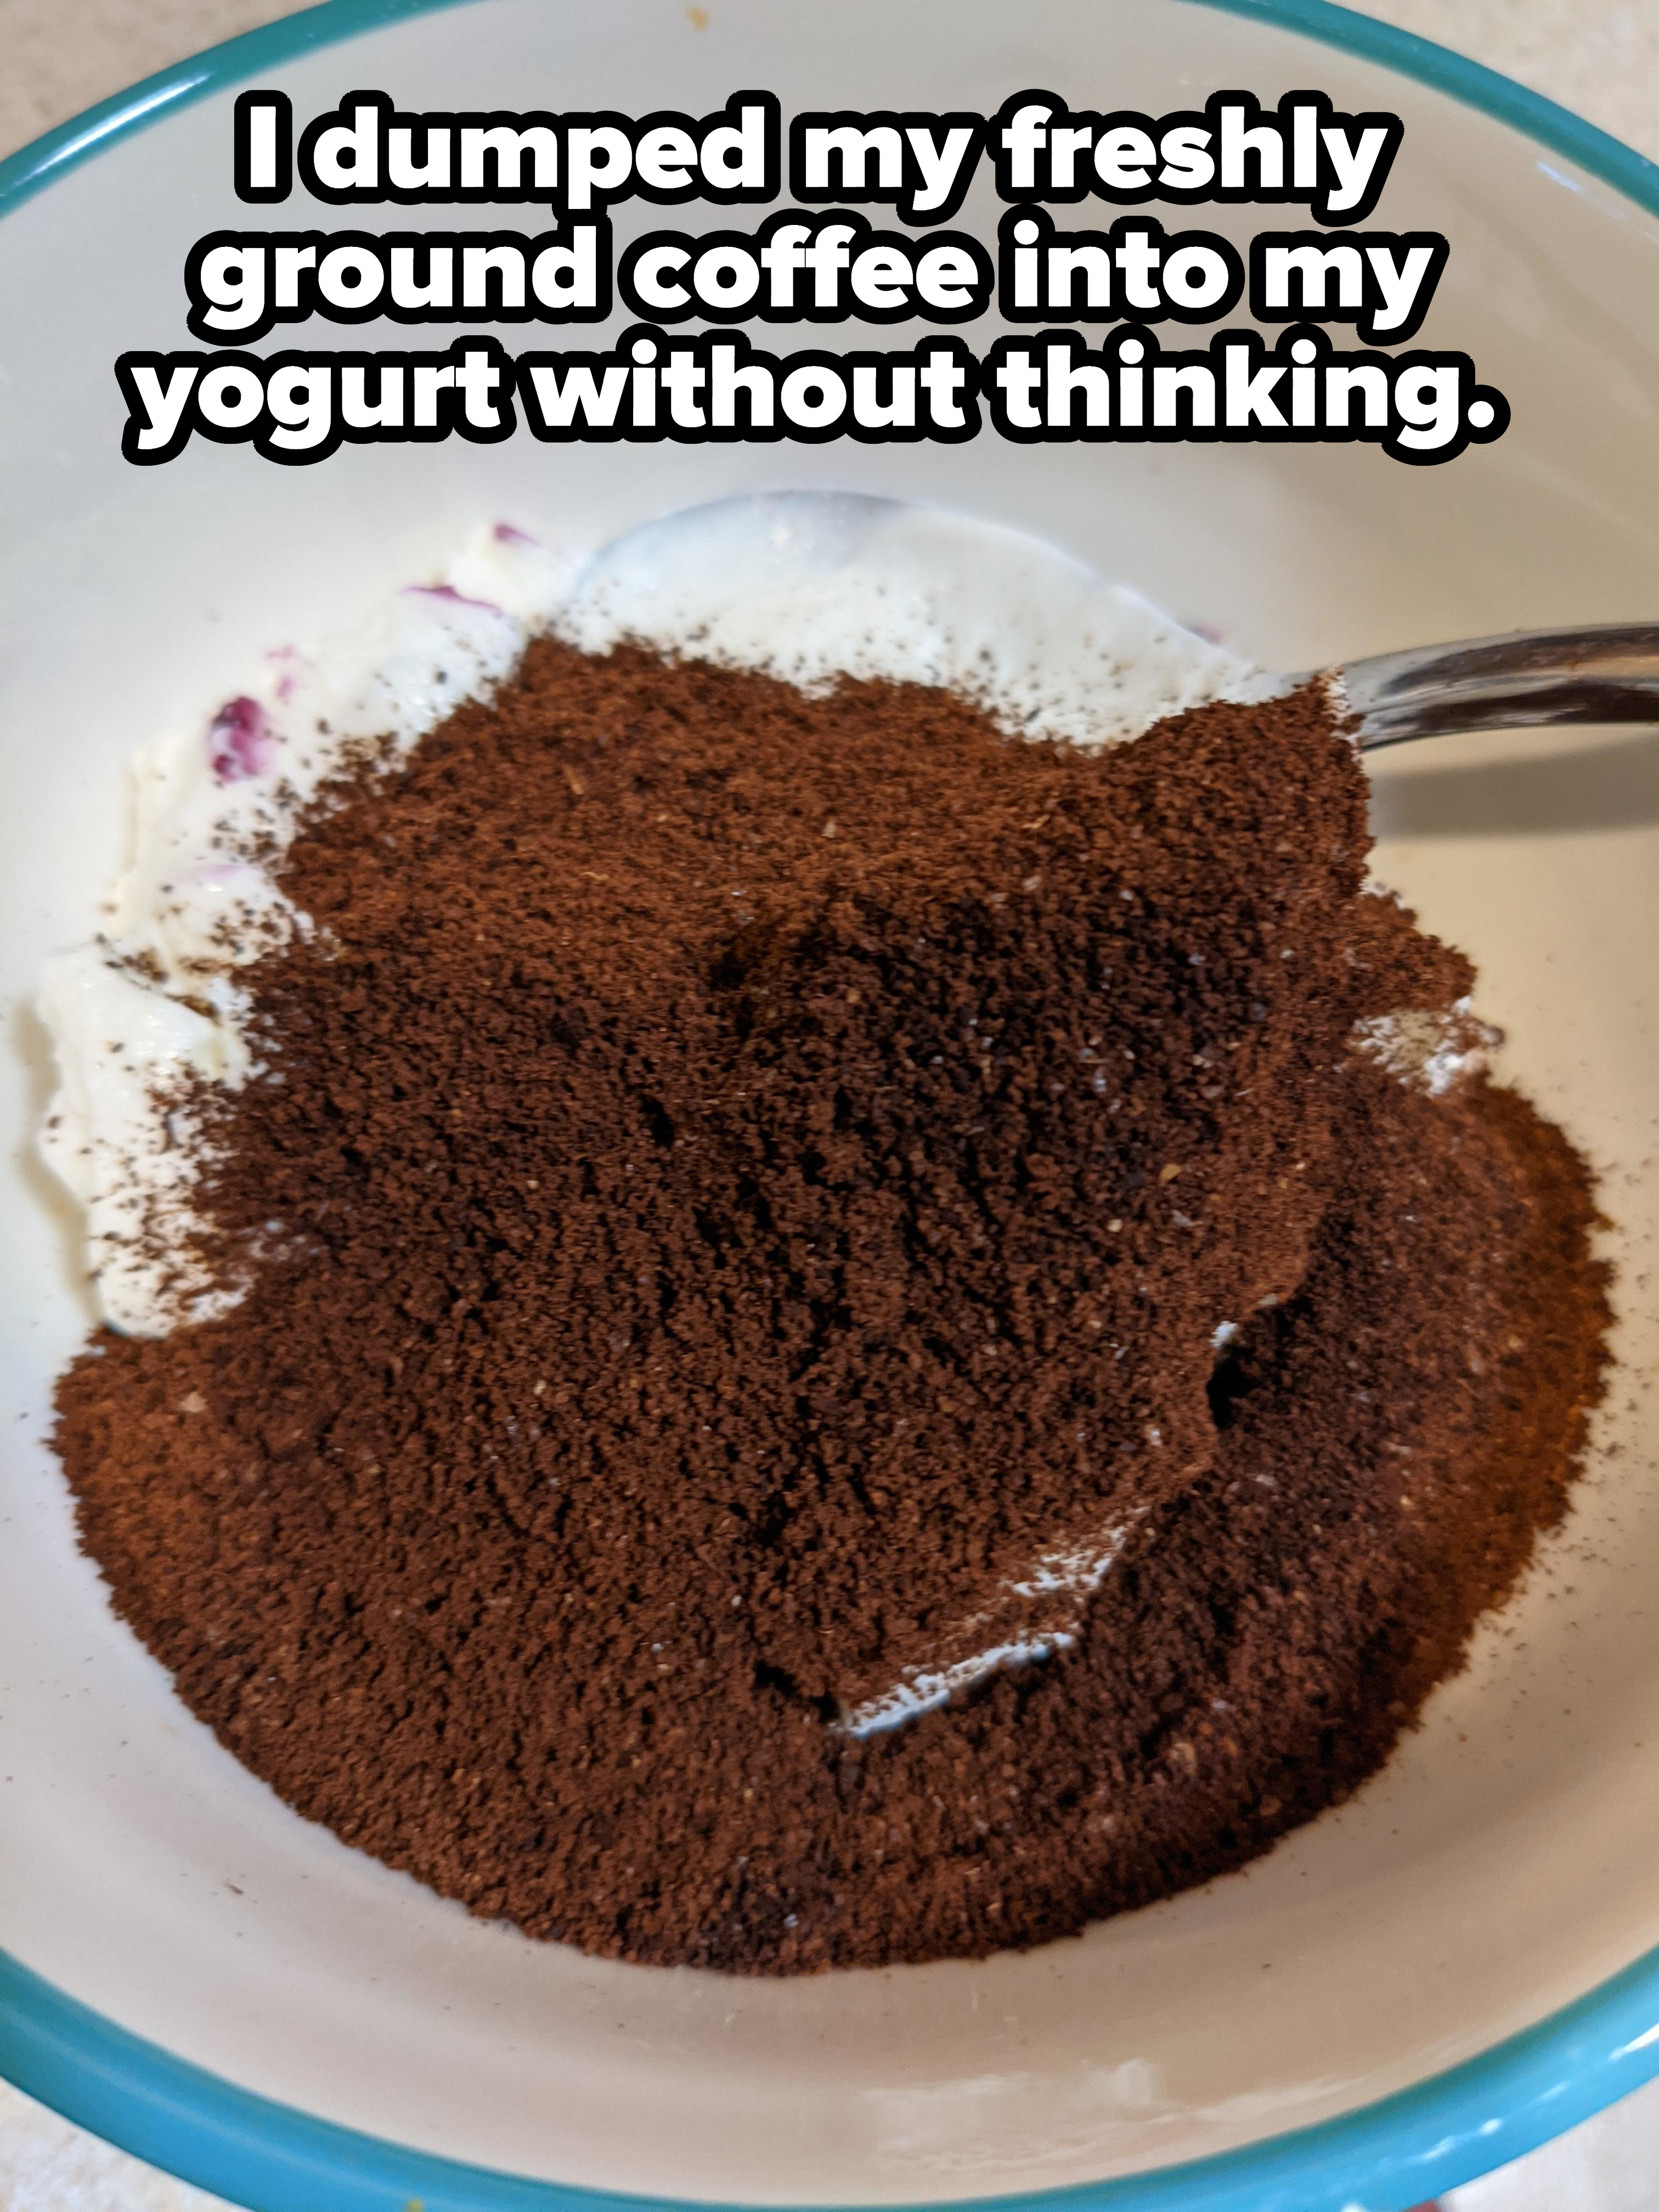 A pile of coffee grounds on top of a plate of yogurt with caption &quot;I dumped my freshly ground coffee into my yogurt without thinking&quot;